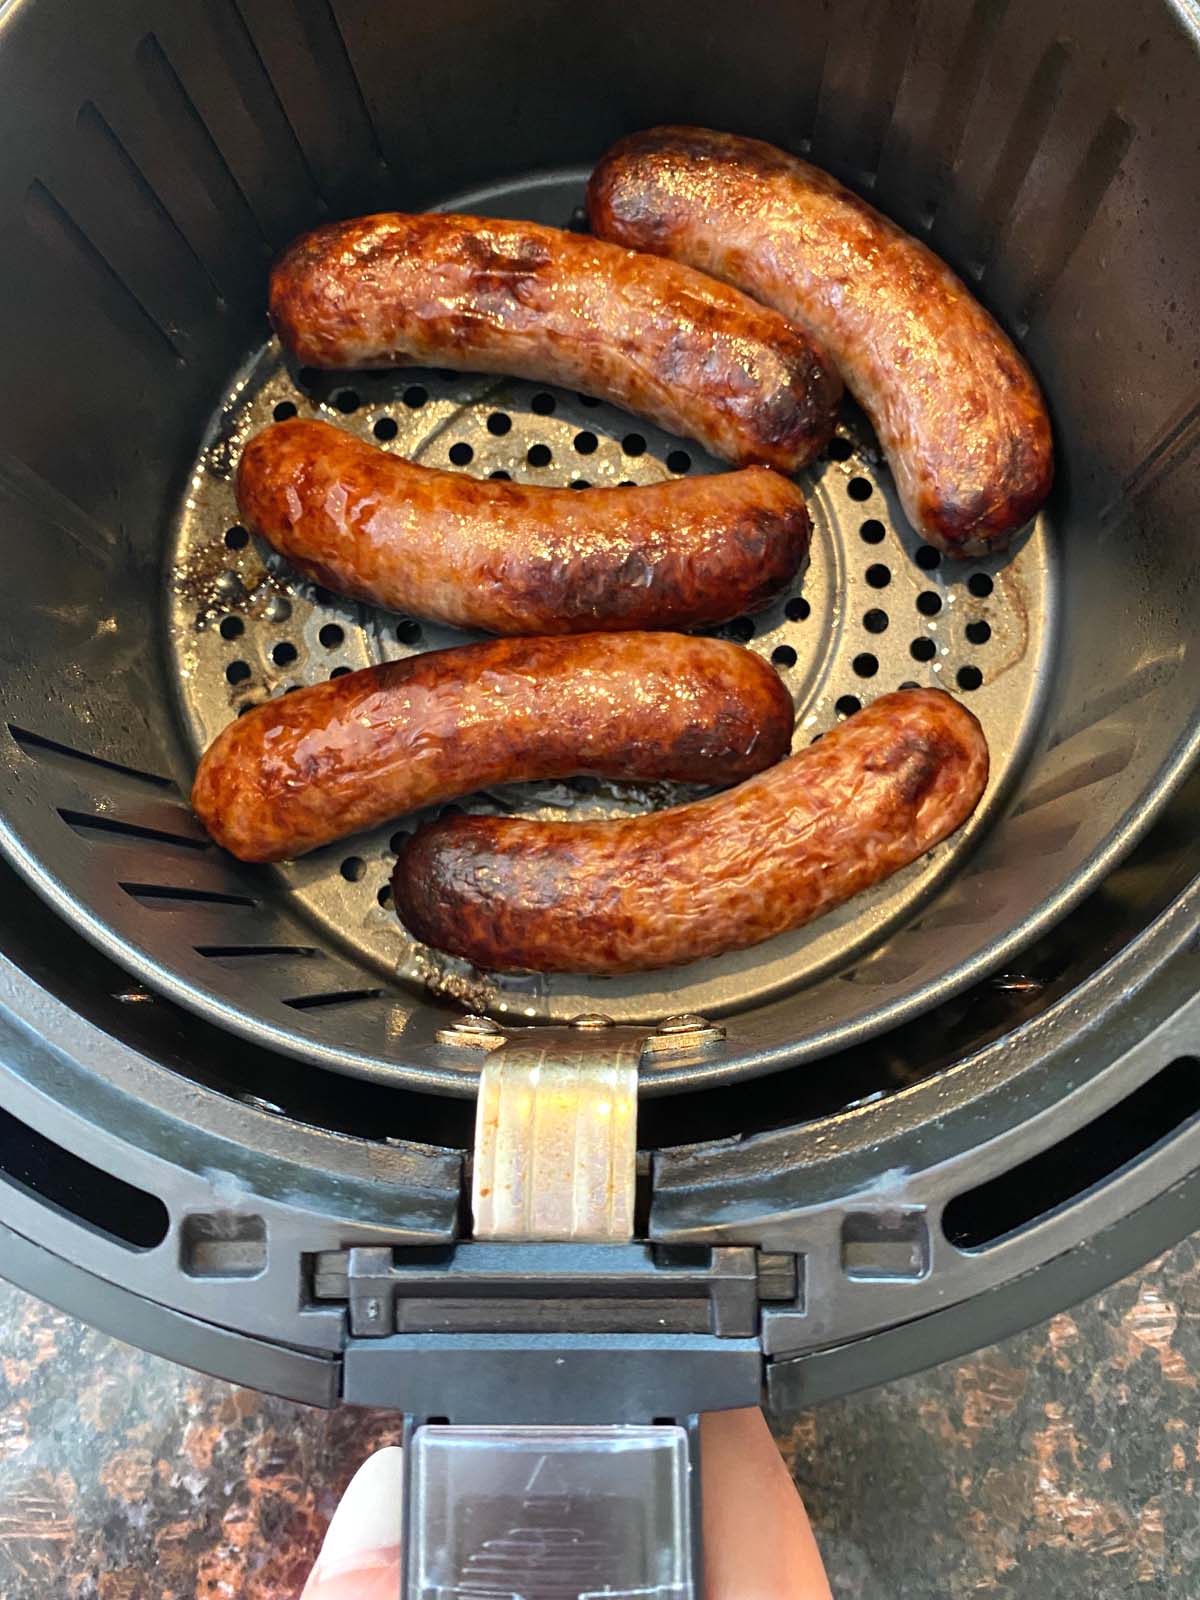 Cooked bratwurst in an air fryer.